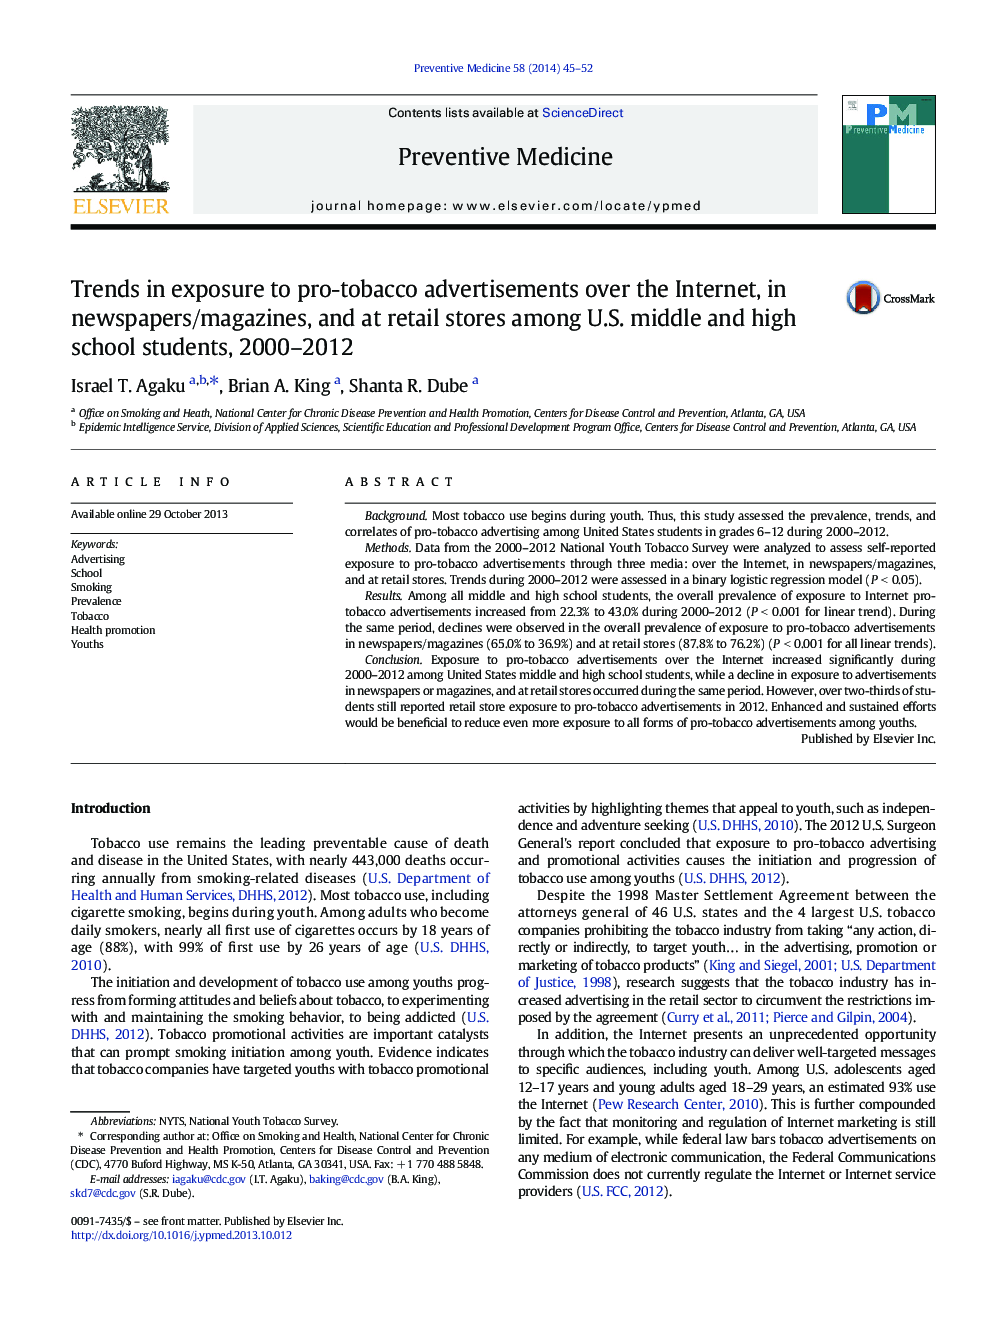 Trends in exposure to pro-tobacco advertisements over the Internet, in newspapers/magazines, and at retail stores among U.S. middle and high school students, 2000-2012